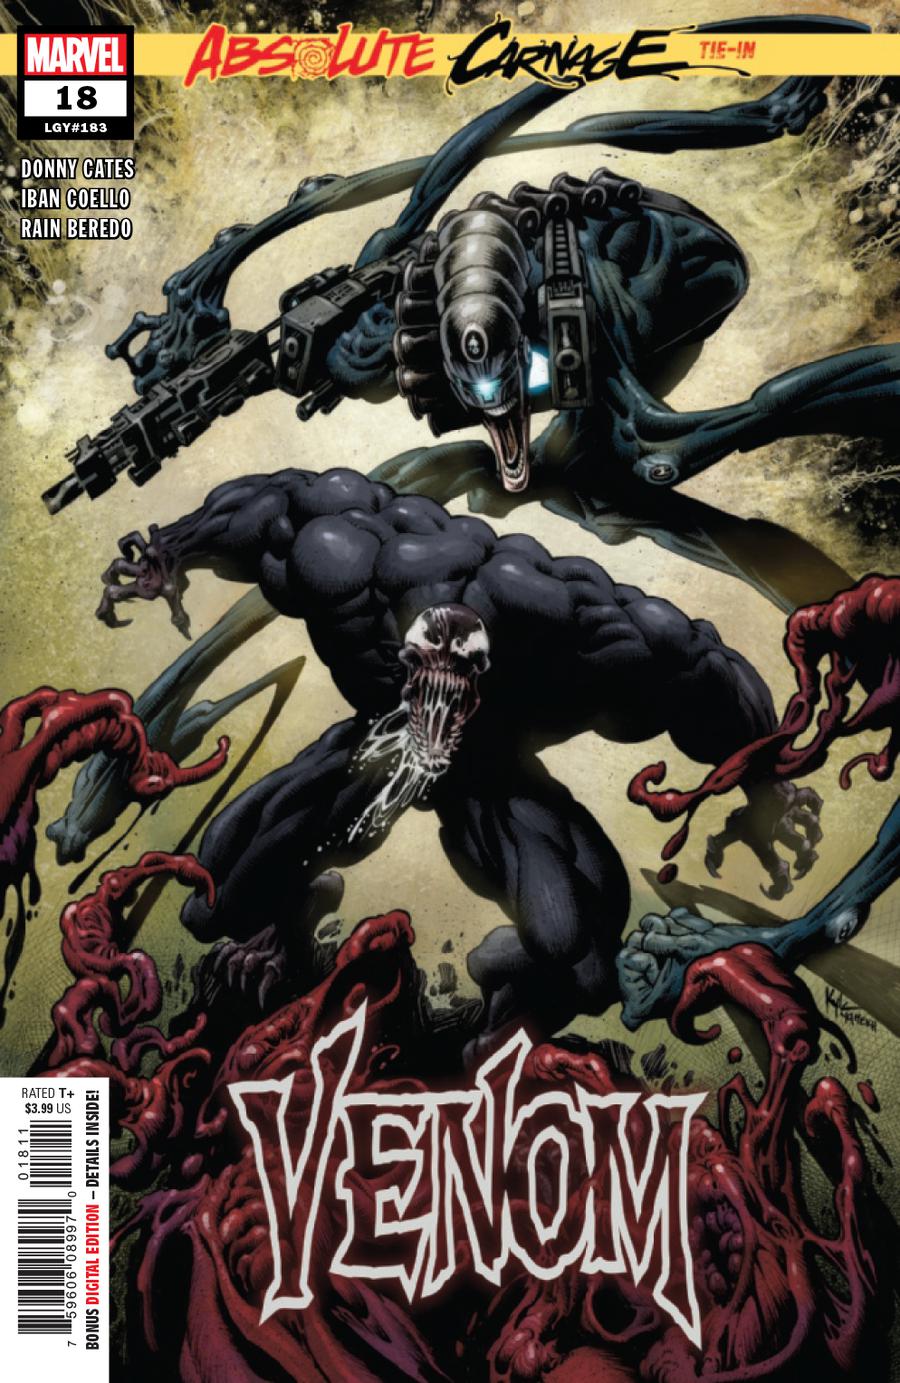 Venom Vol 4 #18 Cover A 1st Ptg Regular Kyle Hotz Cover (Absolute Carnage Tie-In)